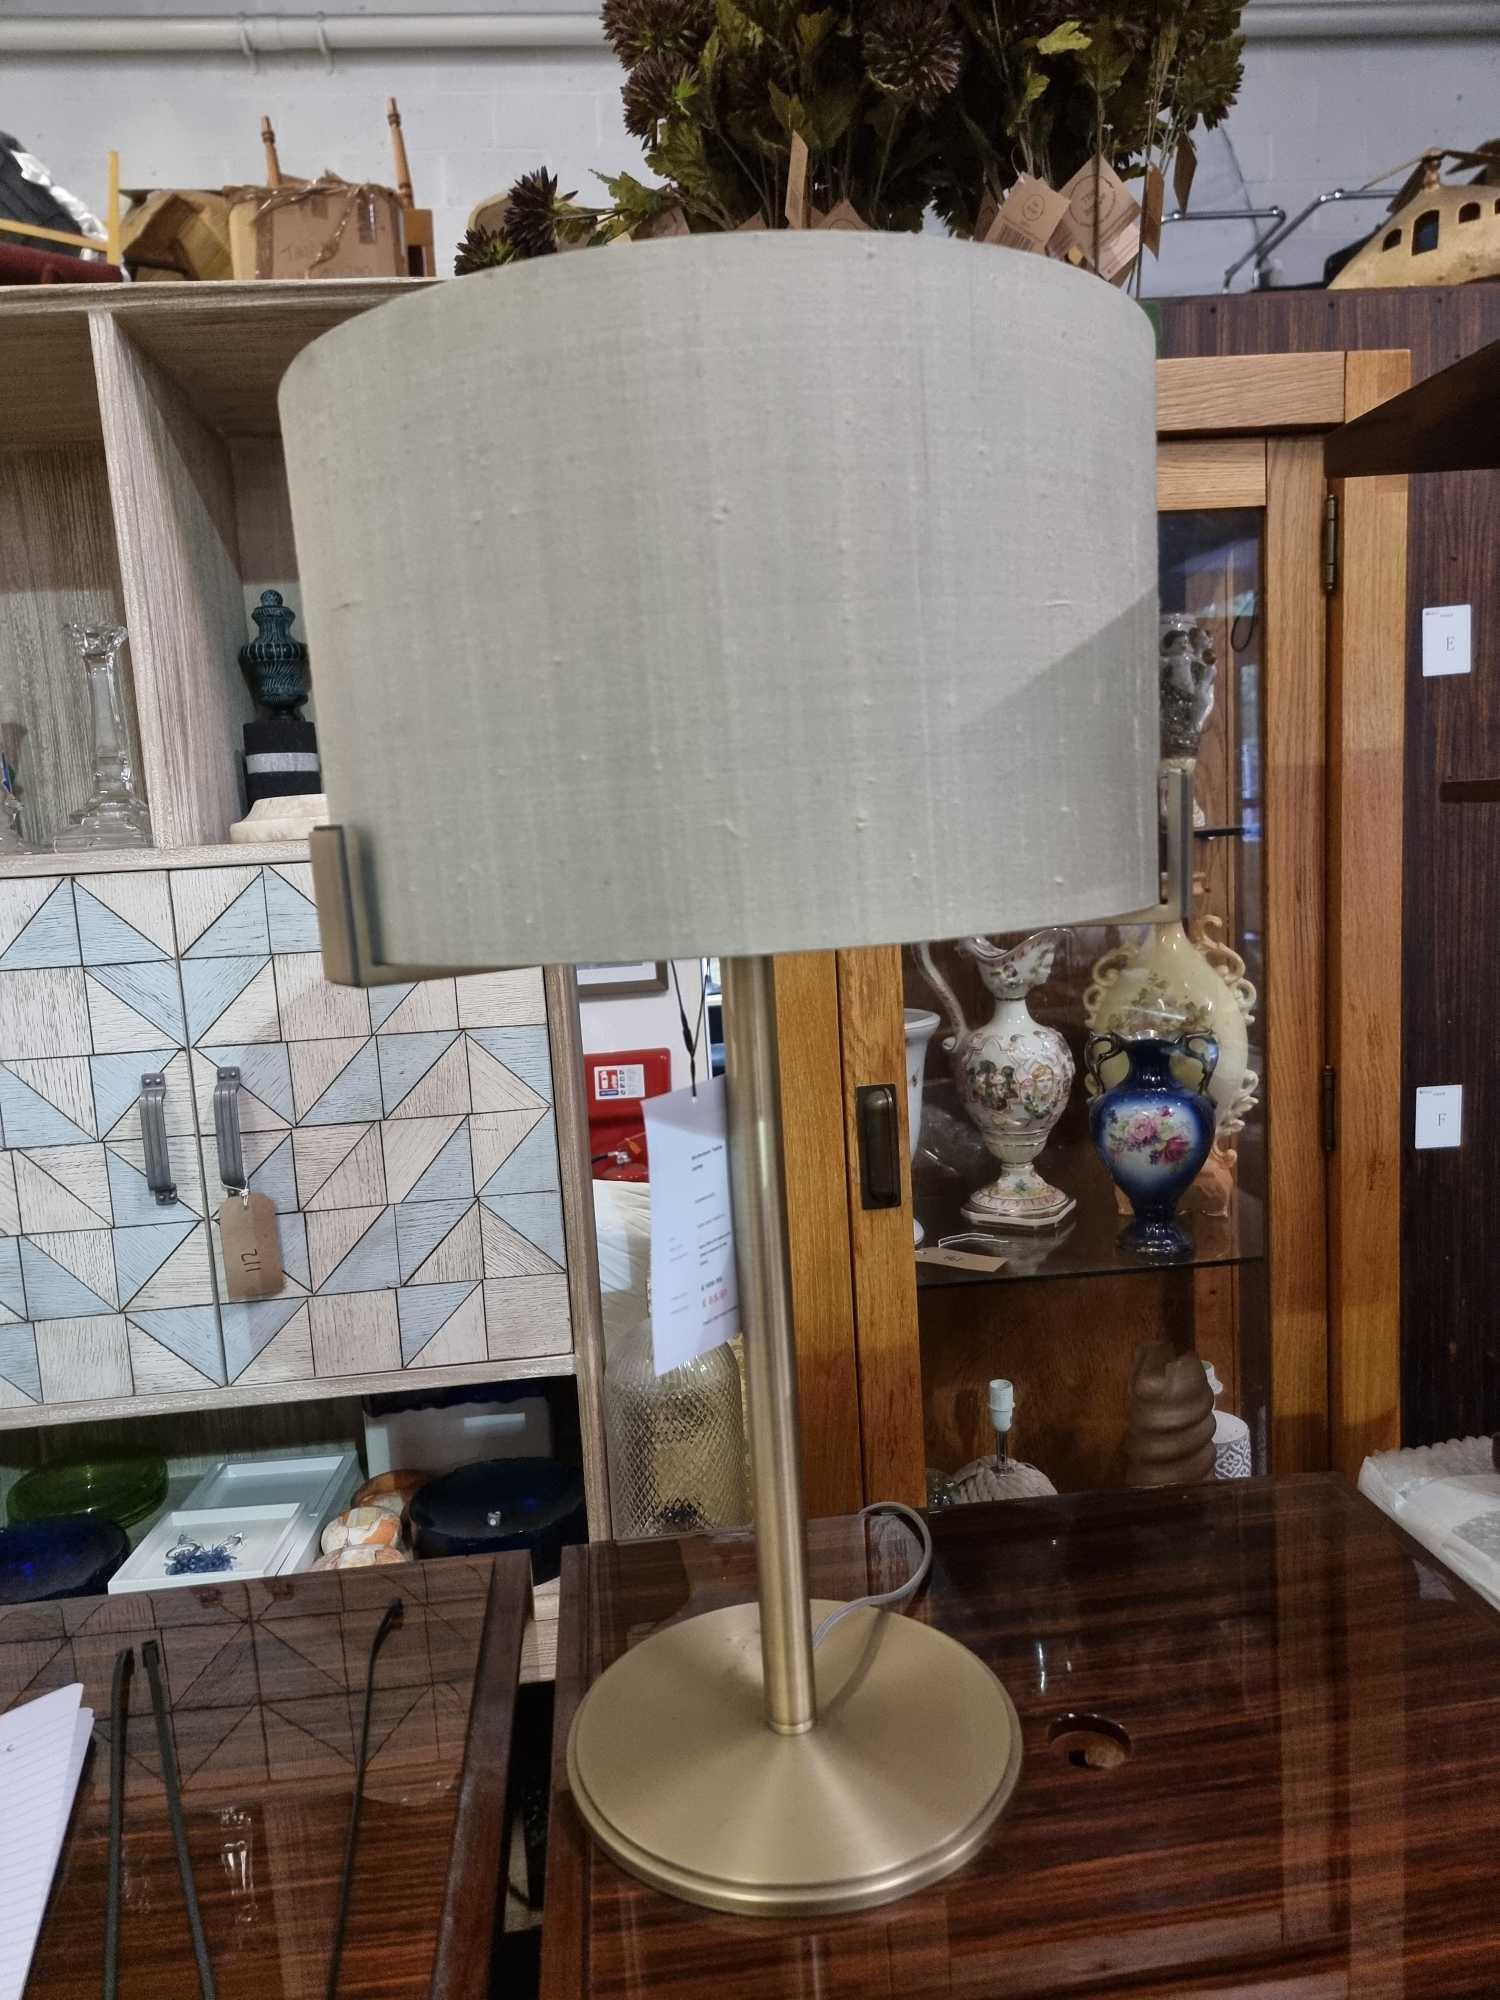 Nicholson Lamp Cleverly Combining Elements Of Contemporary Design With Cool Vintage Flair, This - Image 3 of 5